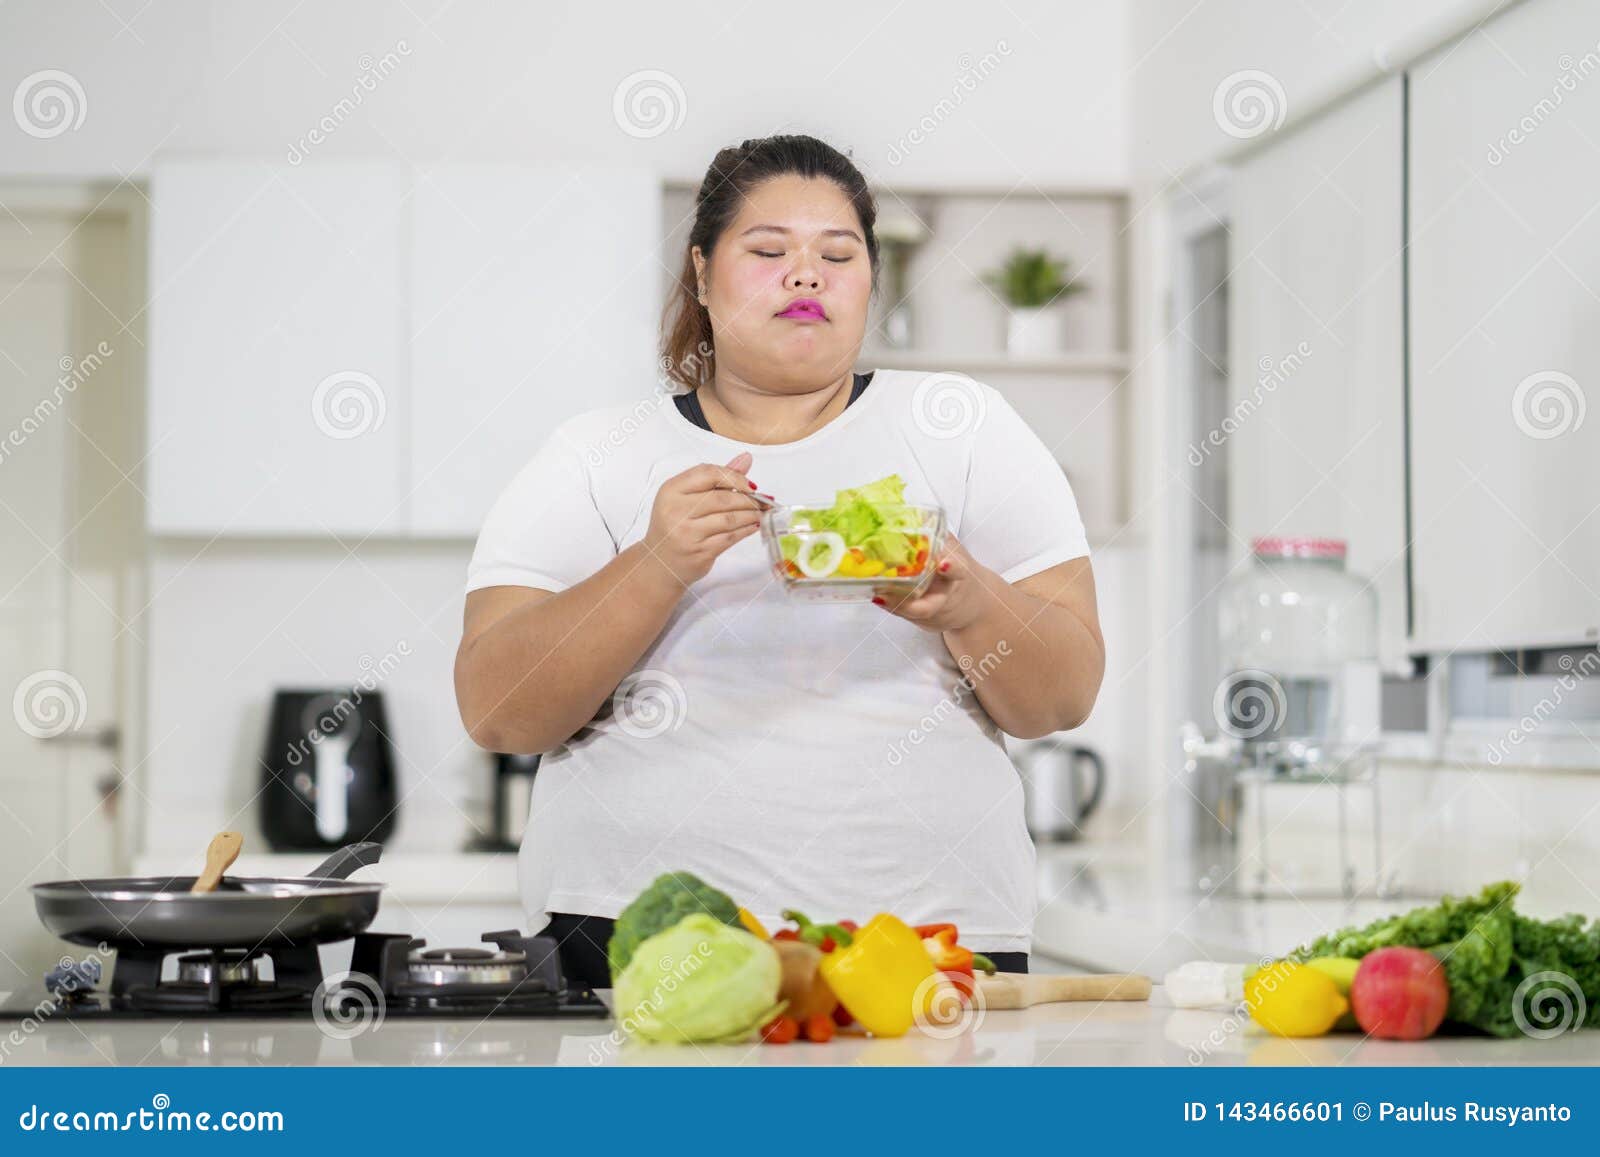 Young Fat Woman Eats Tasty Salad In The Kitchen Stock Image Image Of